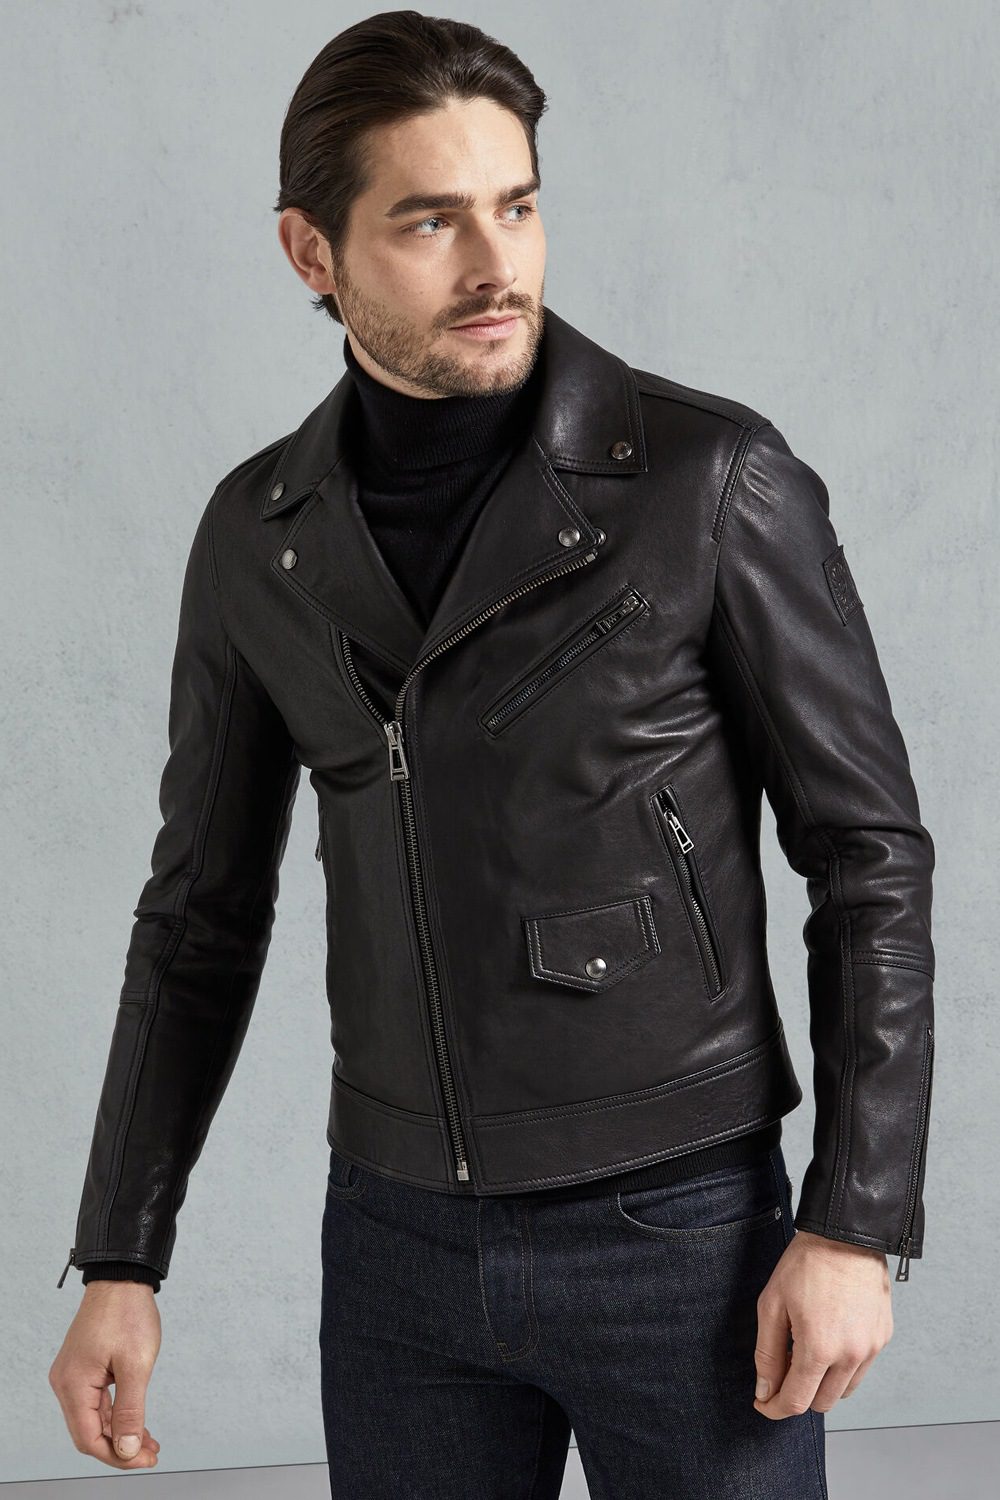 The Best Leather Jacket Brands For Men In 2021